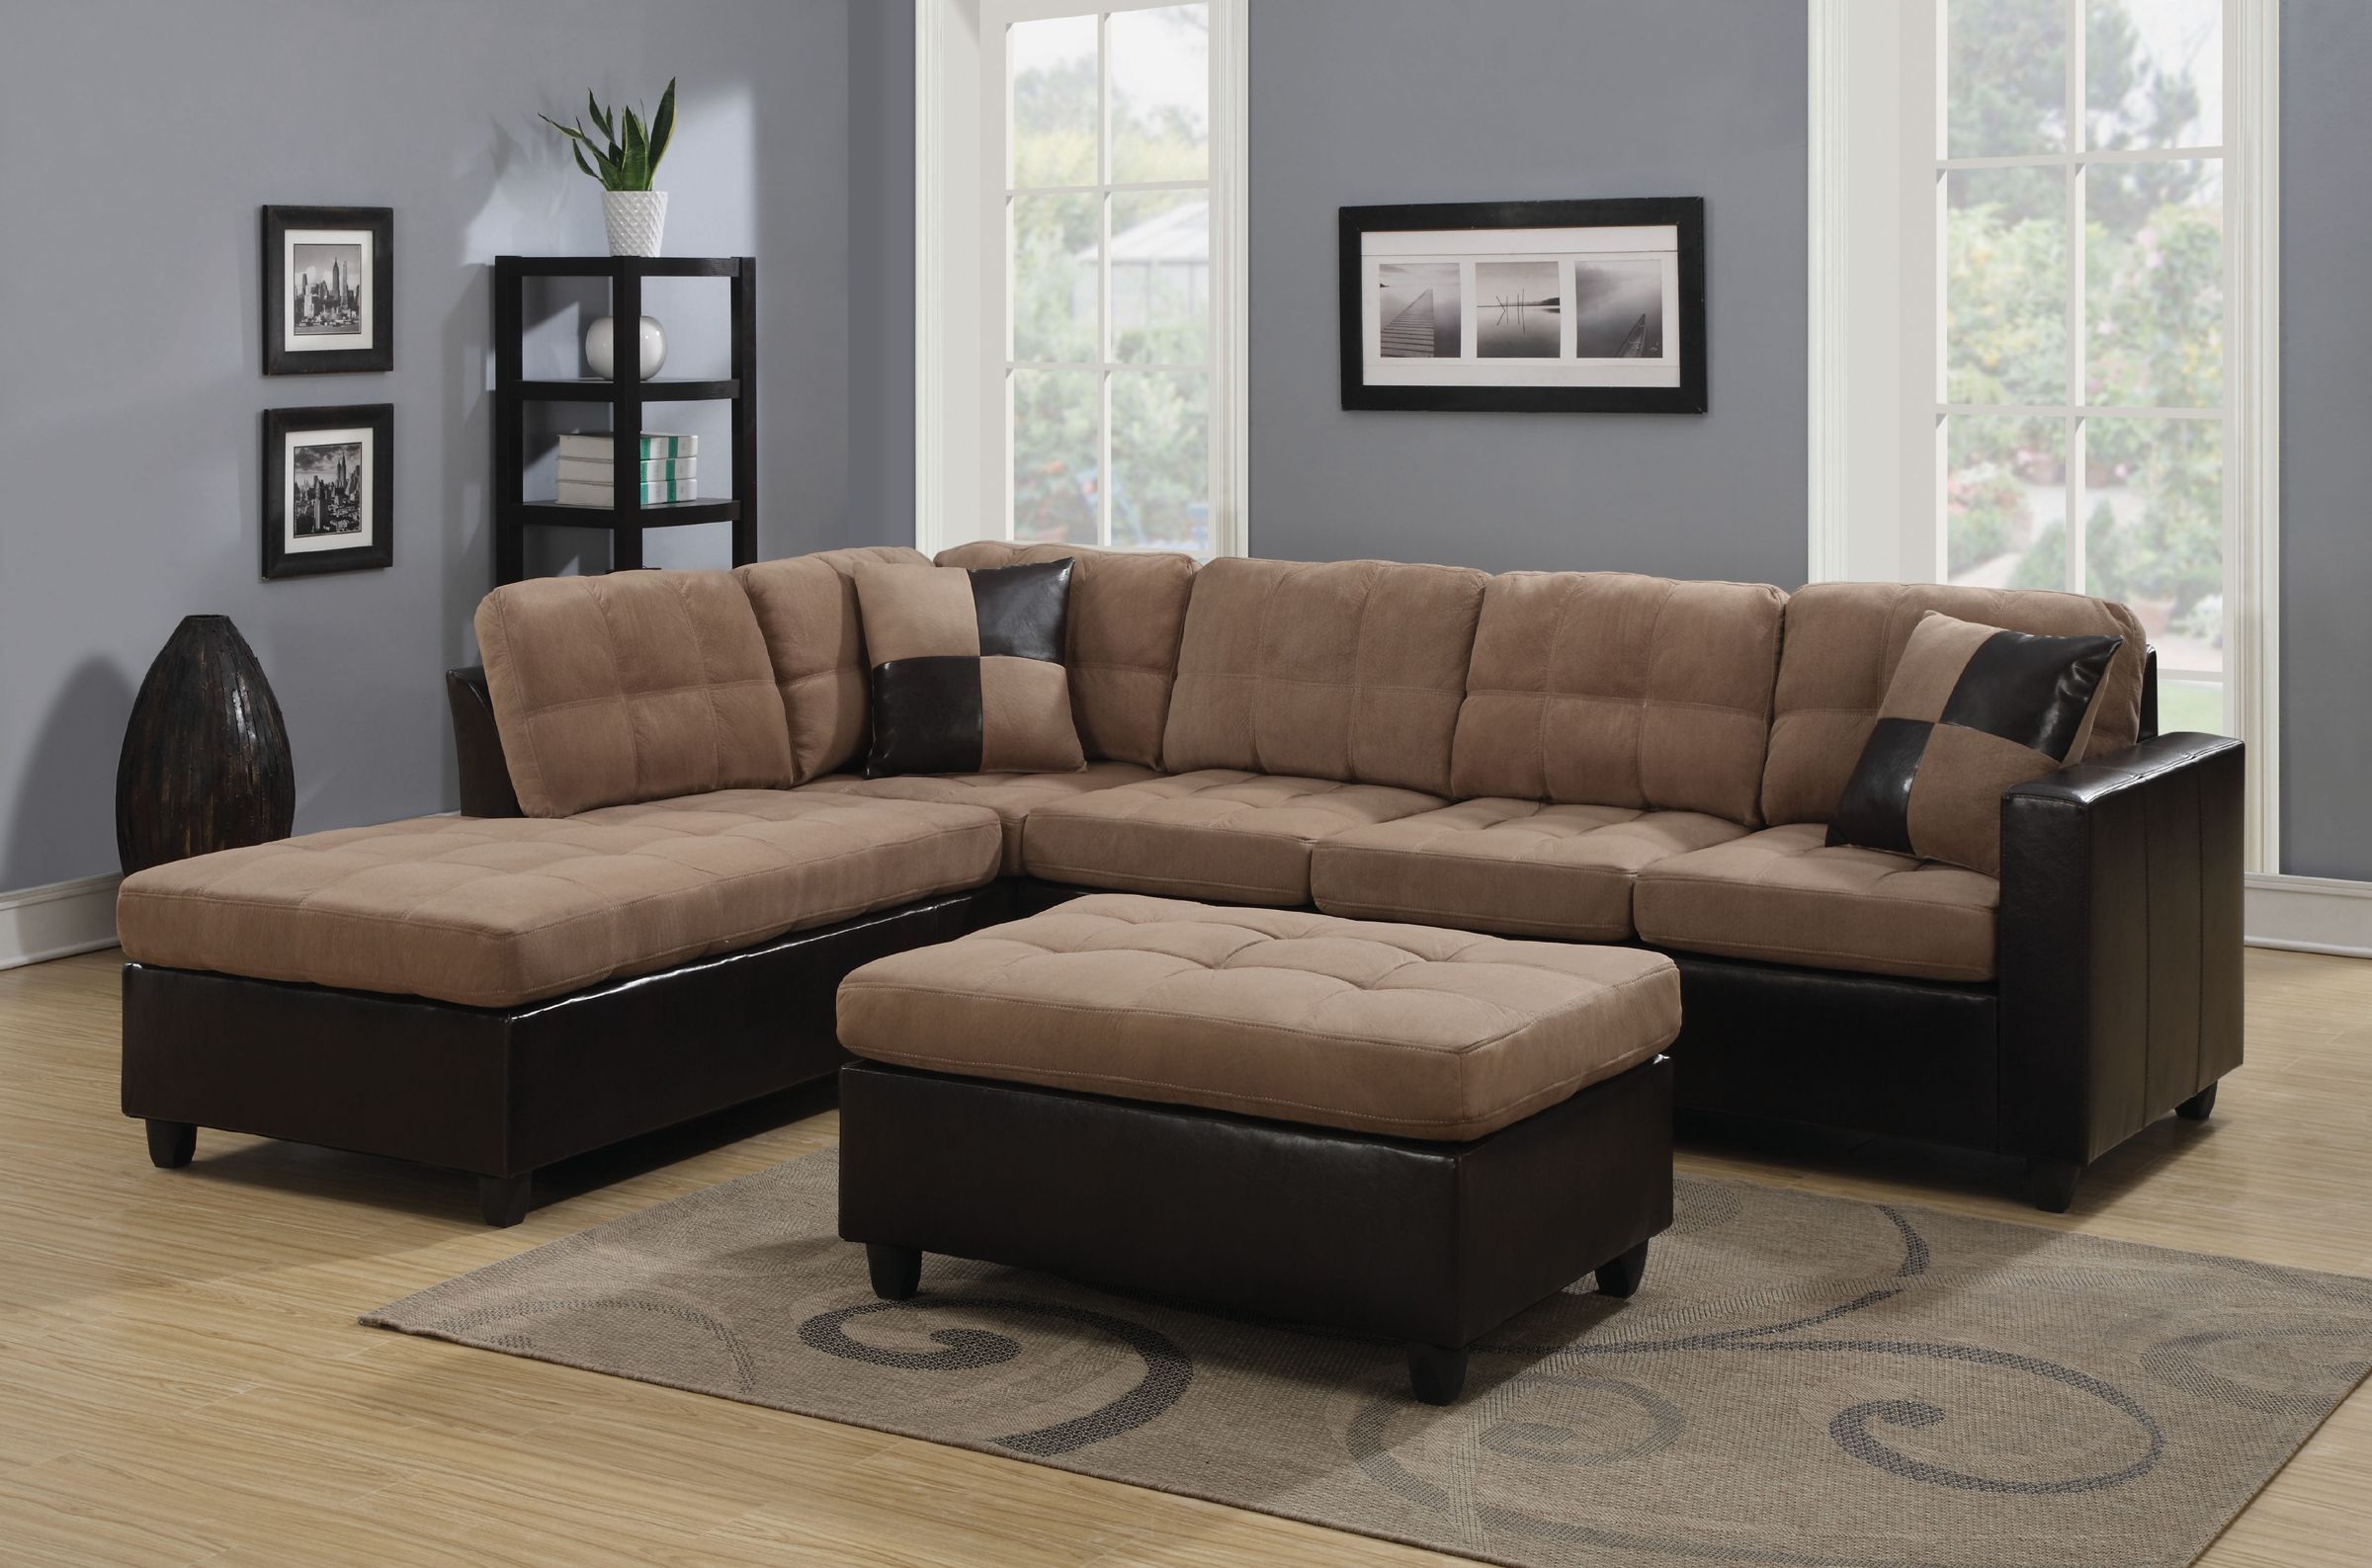 Reversible Tan Microfiber Sectional Sofa With Chaise Set Inside Clifton Reversible Sectional Sofas With Pillows (Photo 4 of 15)